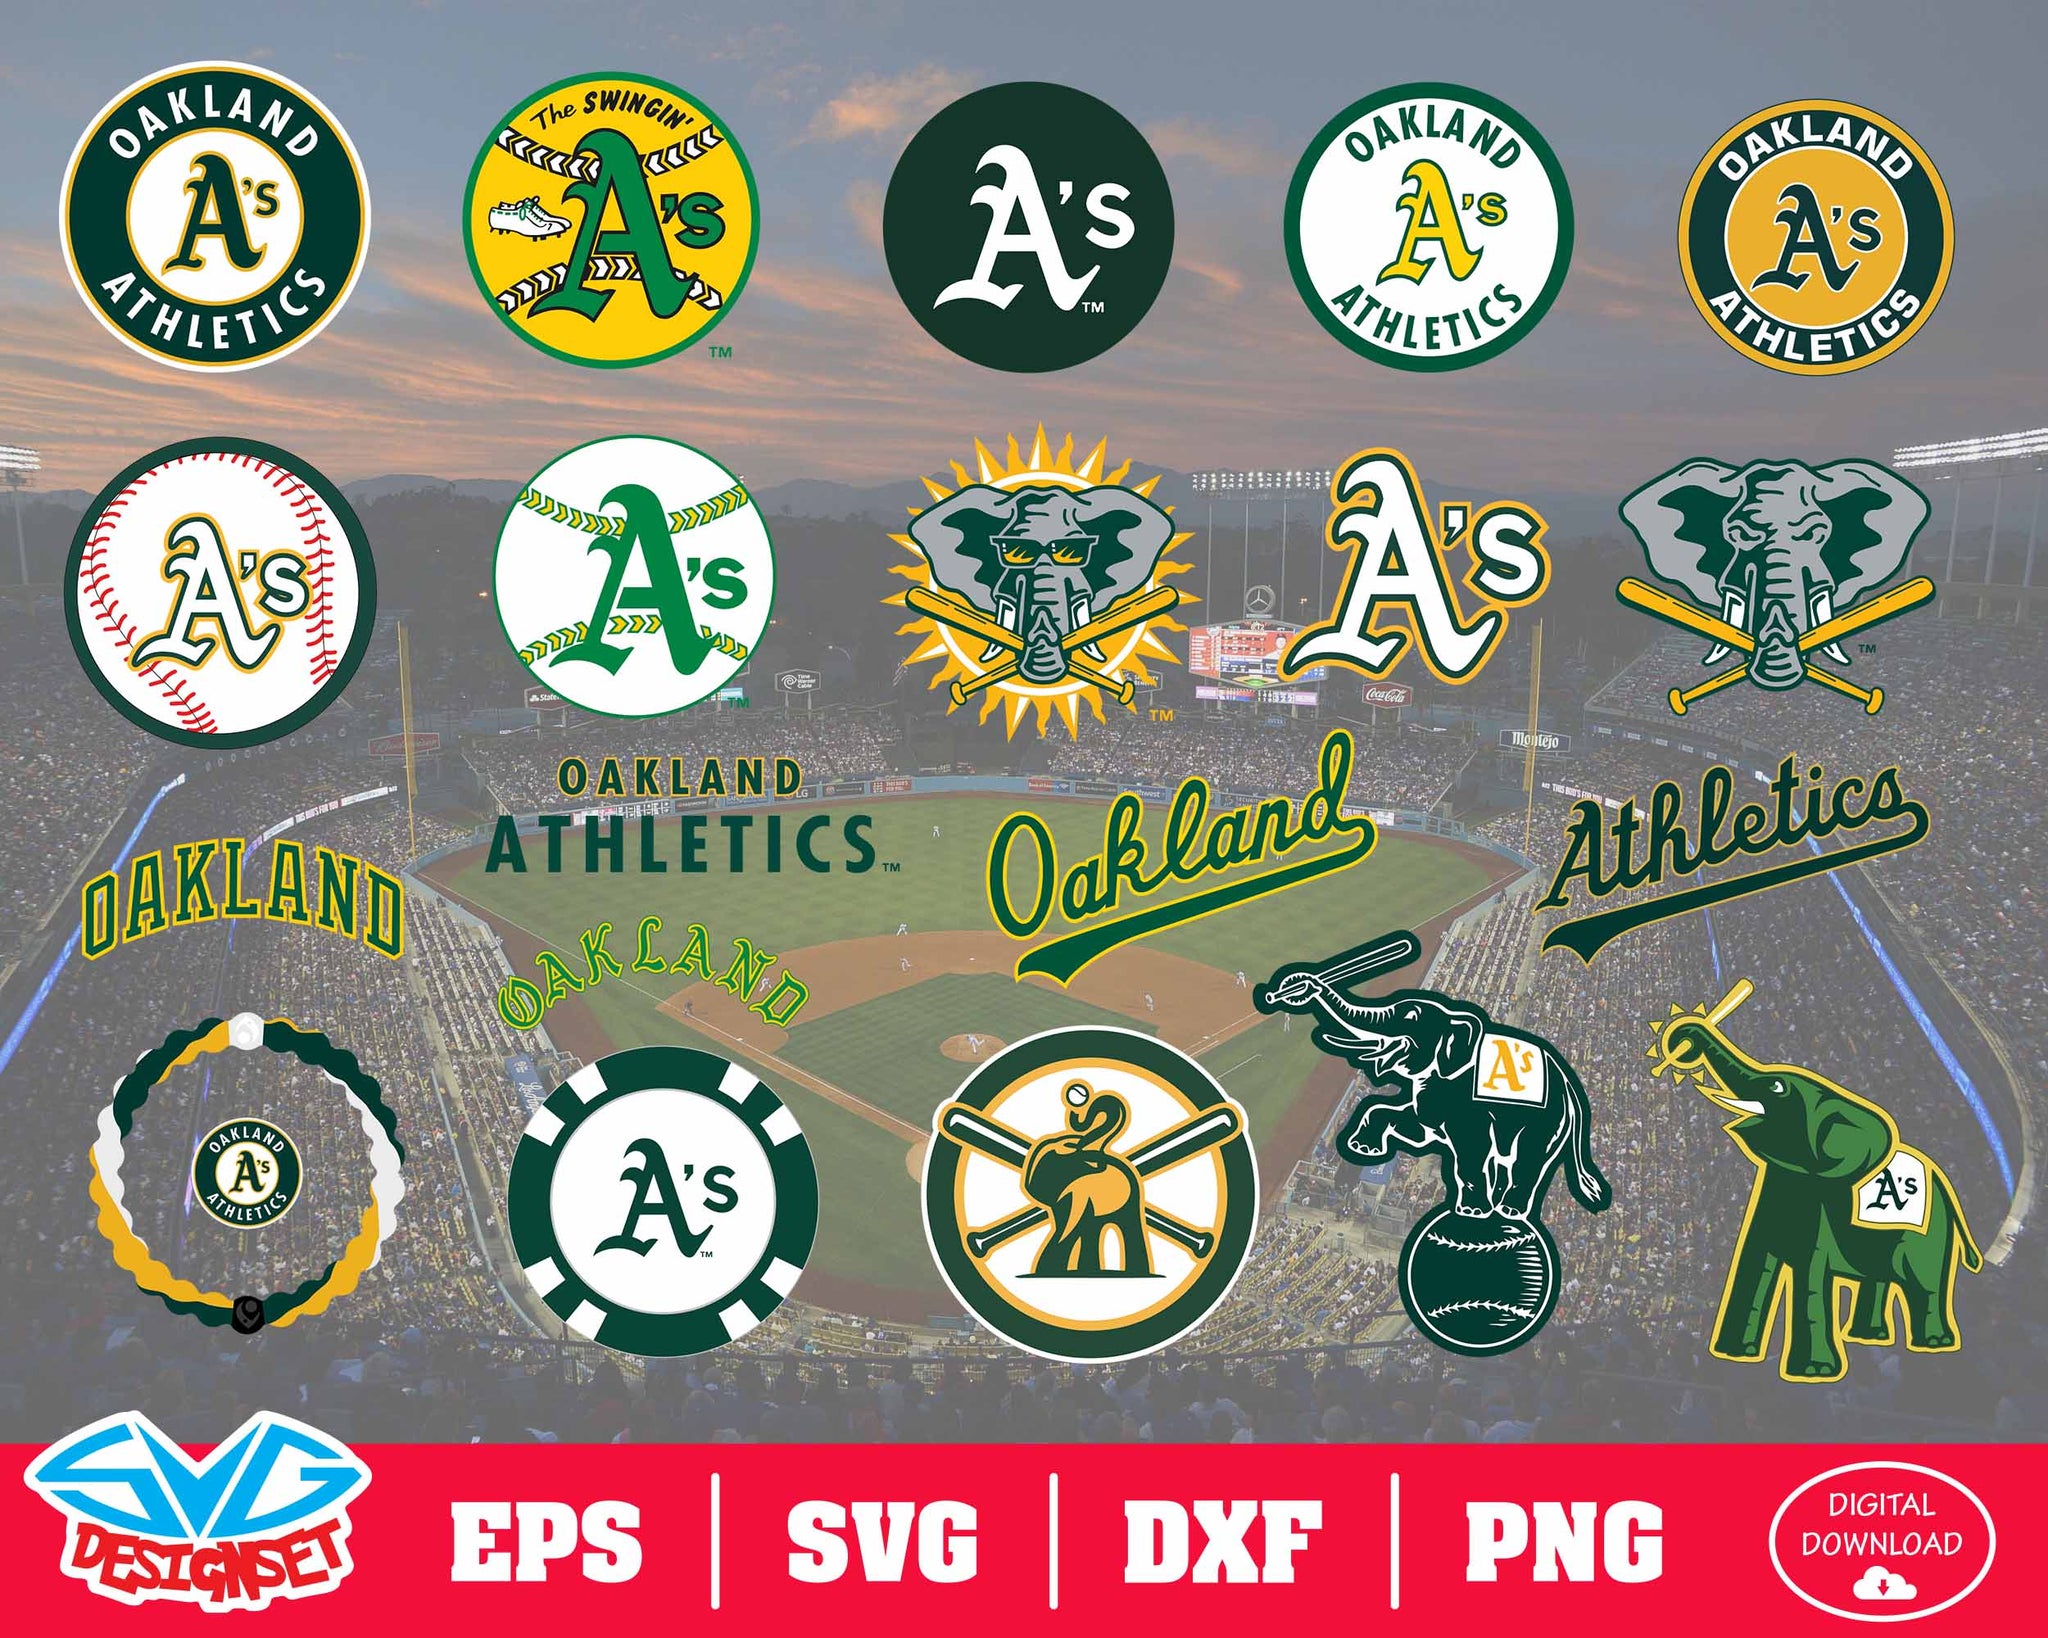 Oakland Athletics Team Svg, Dxf, Eps, Png, Clipart, Silhouette and Cutfiles - SVGDesignSets